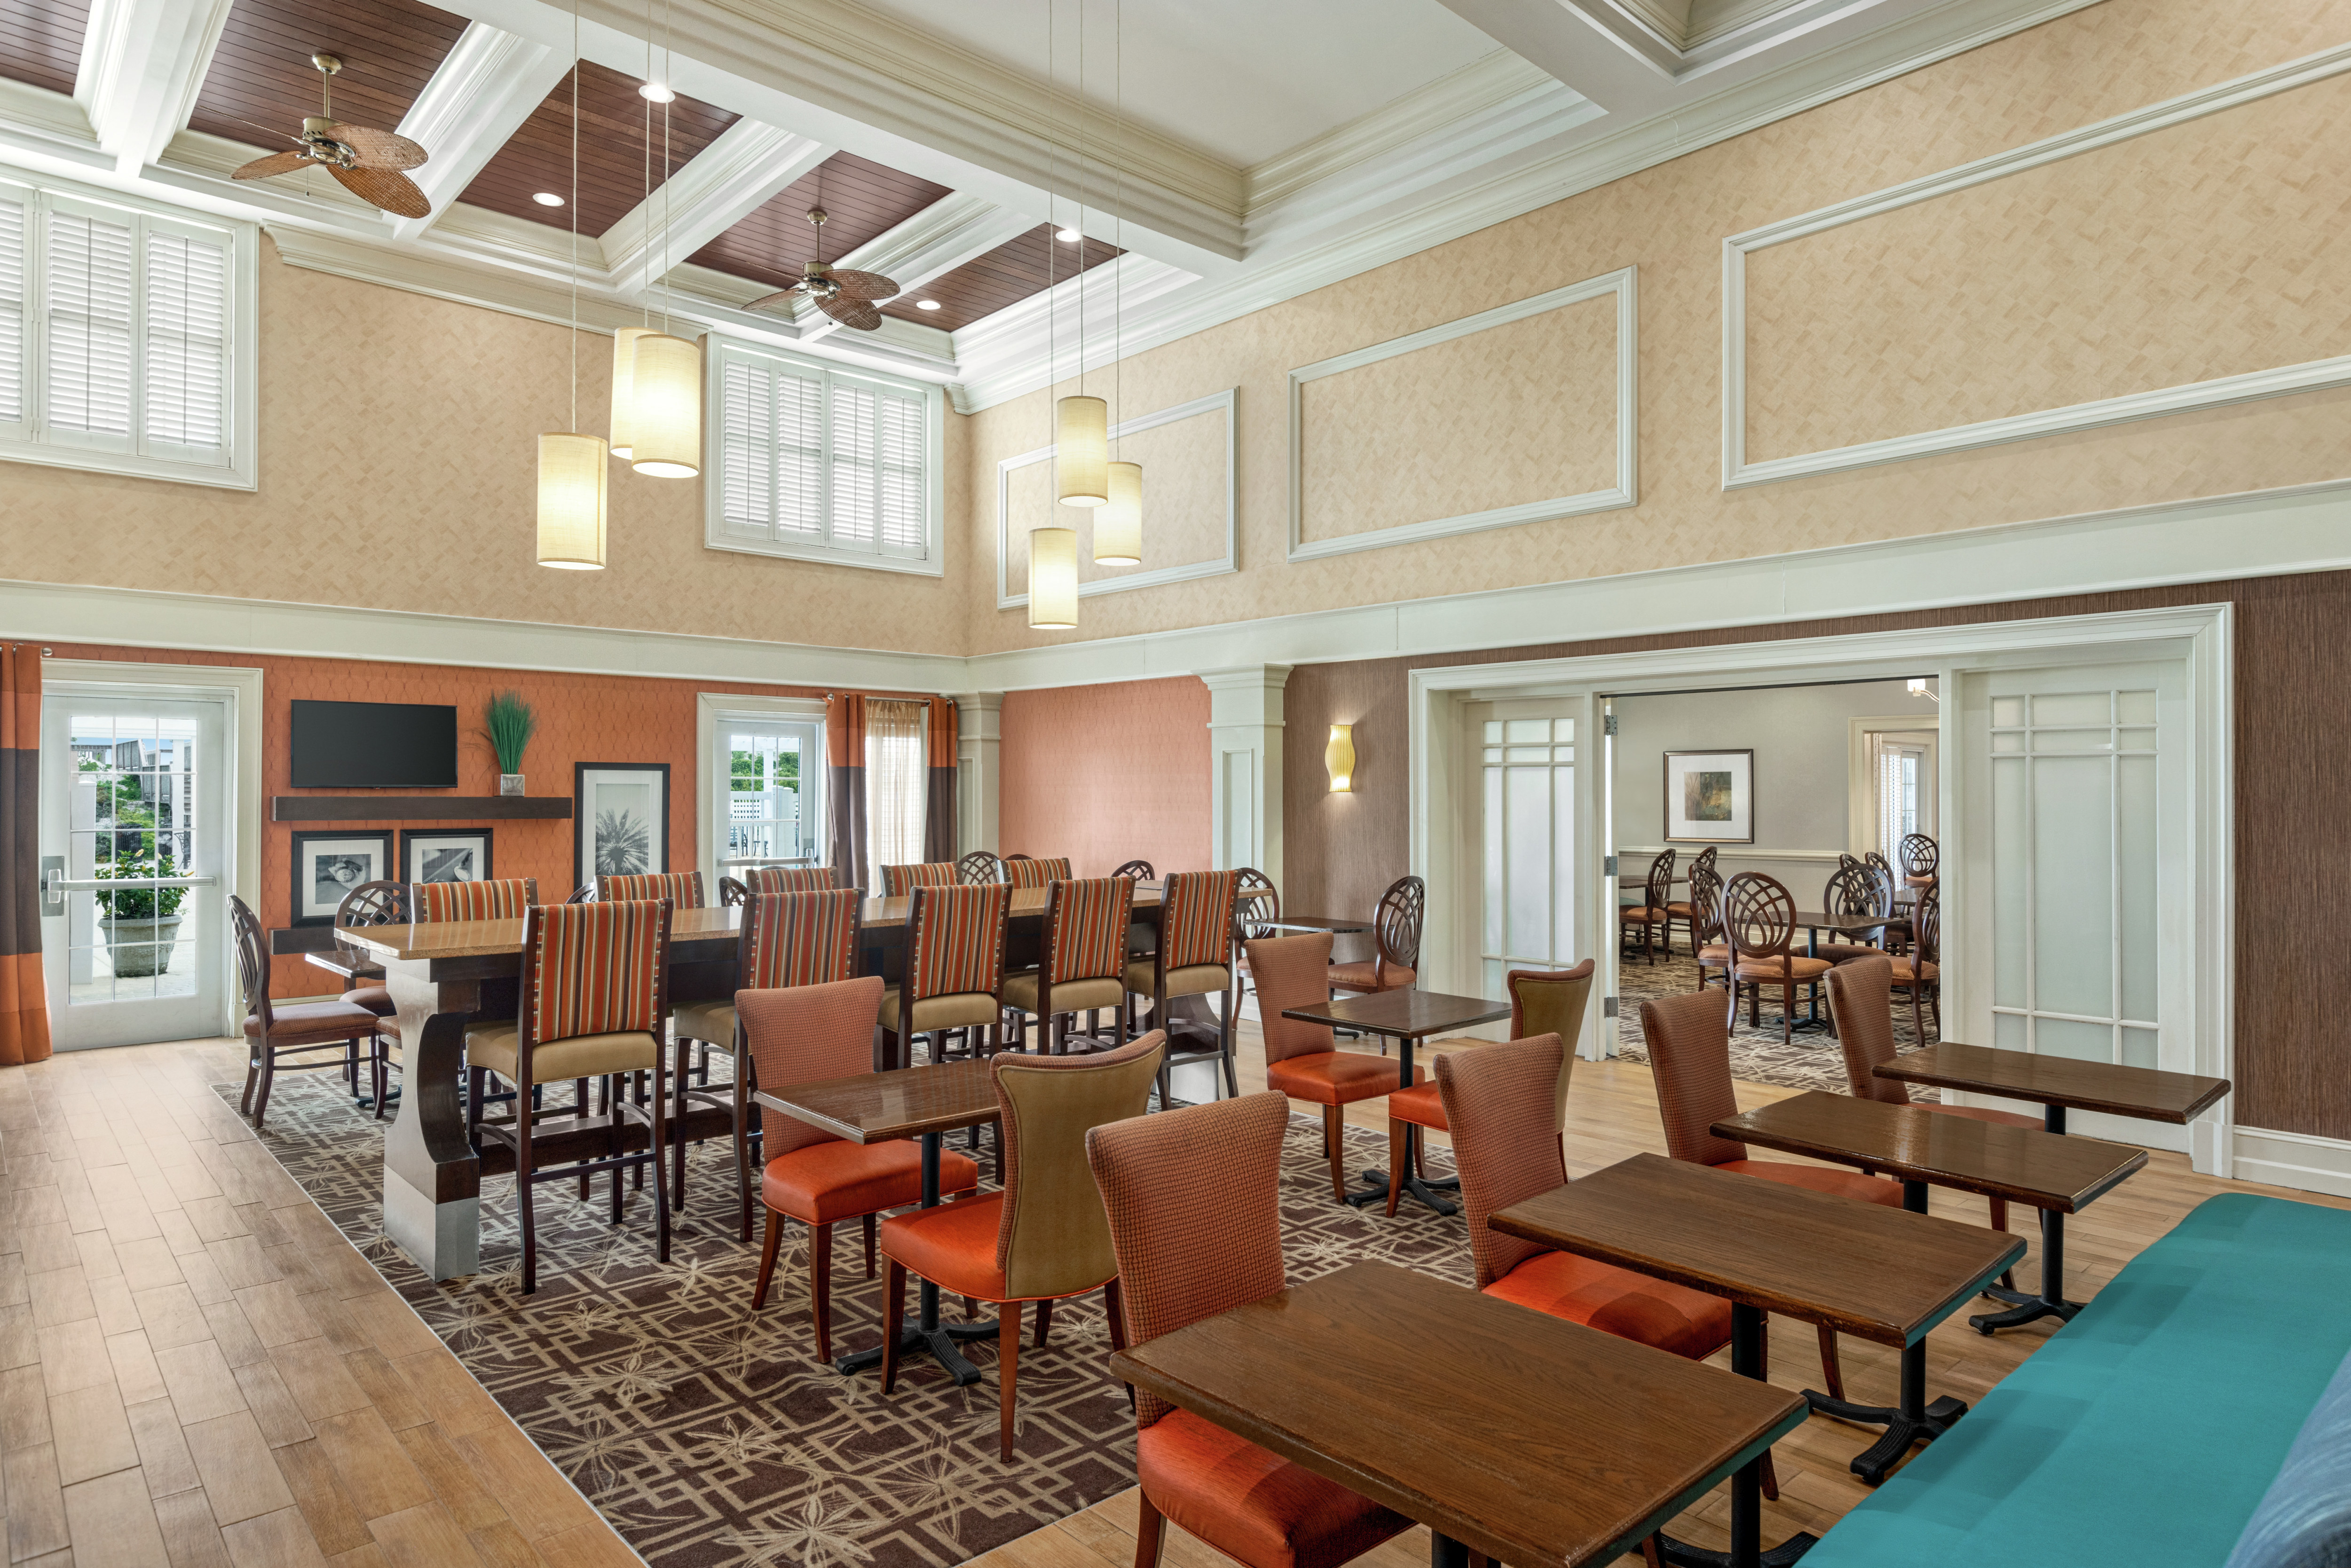 Spacious breakfast seating area featuring ample seating, high ceilings, and TV.